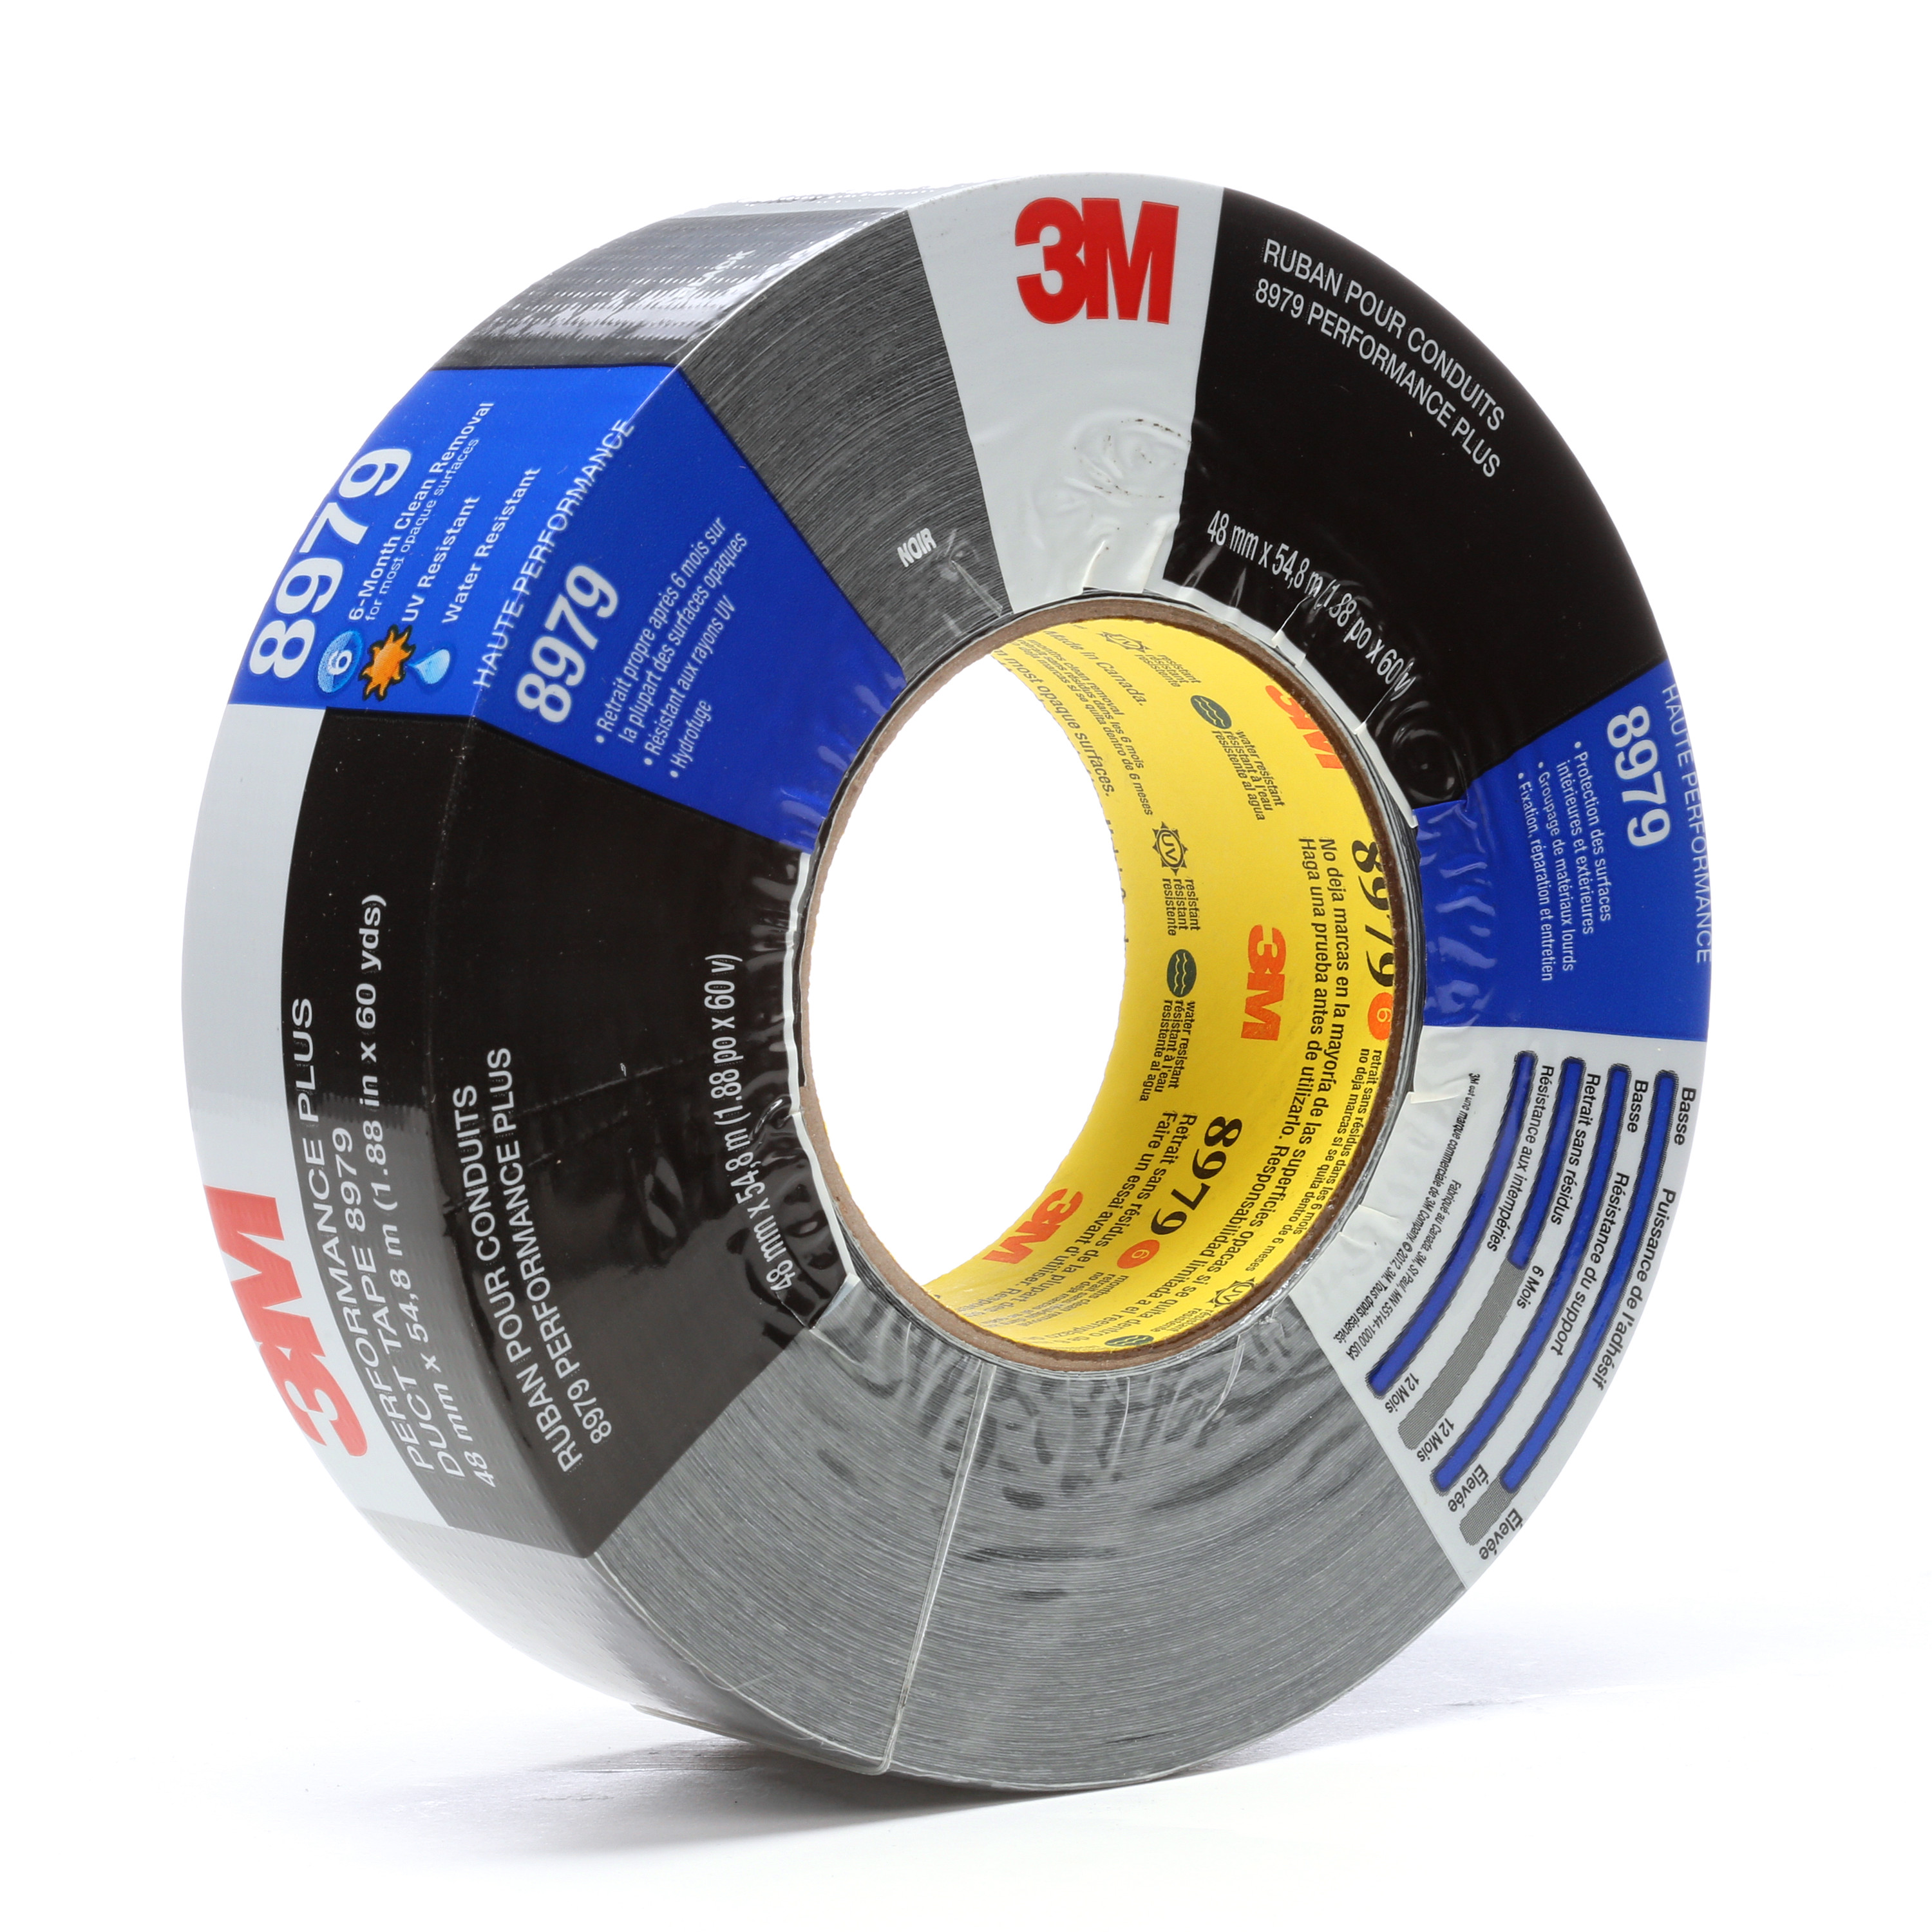 3M™ Performance Plus Duct Tape 8979, Black, 48 mm x 54.8 m, 12.1 mil, 24
per case, Conveniently Packaged